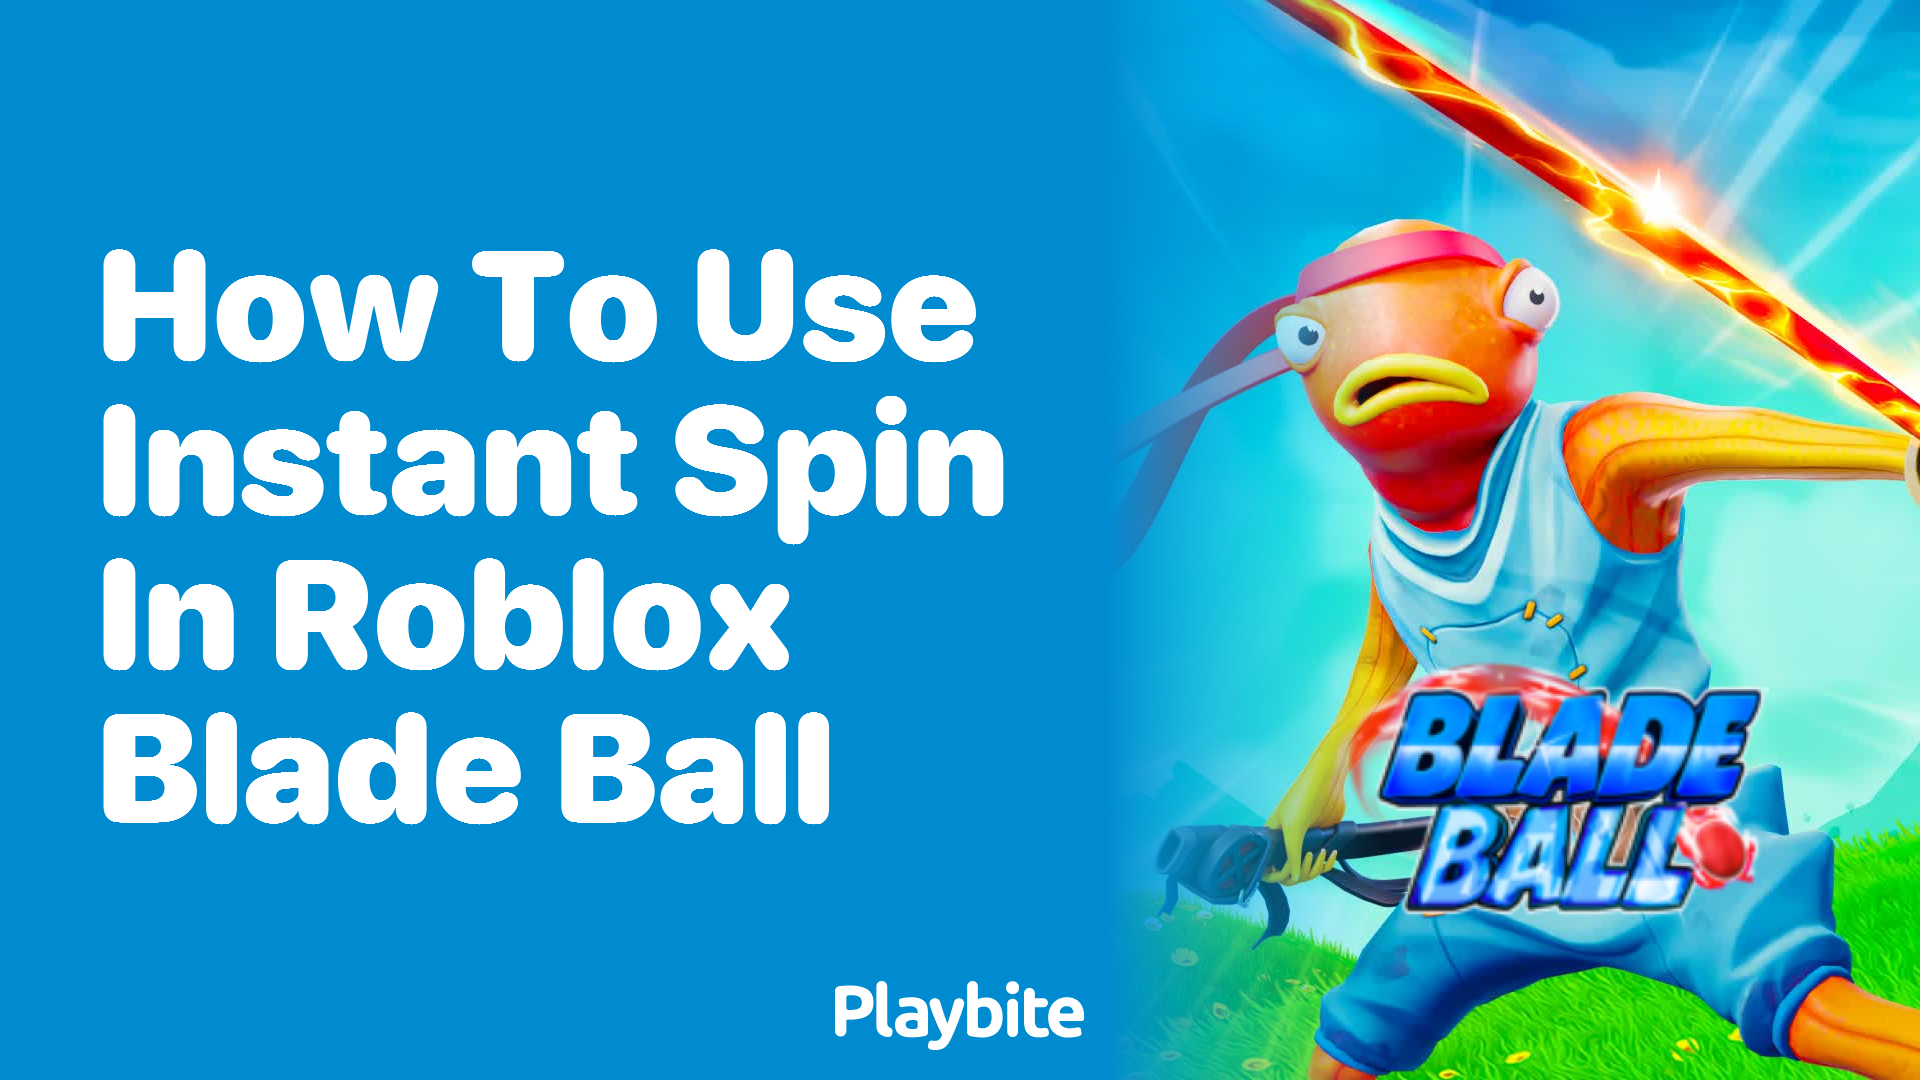 How to Use Instant Spin in Roblox Blade Ball